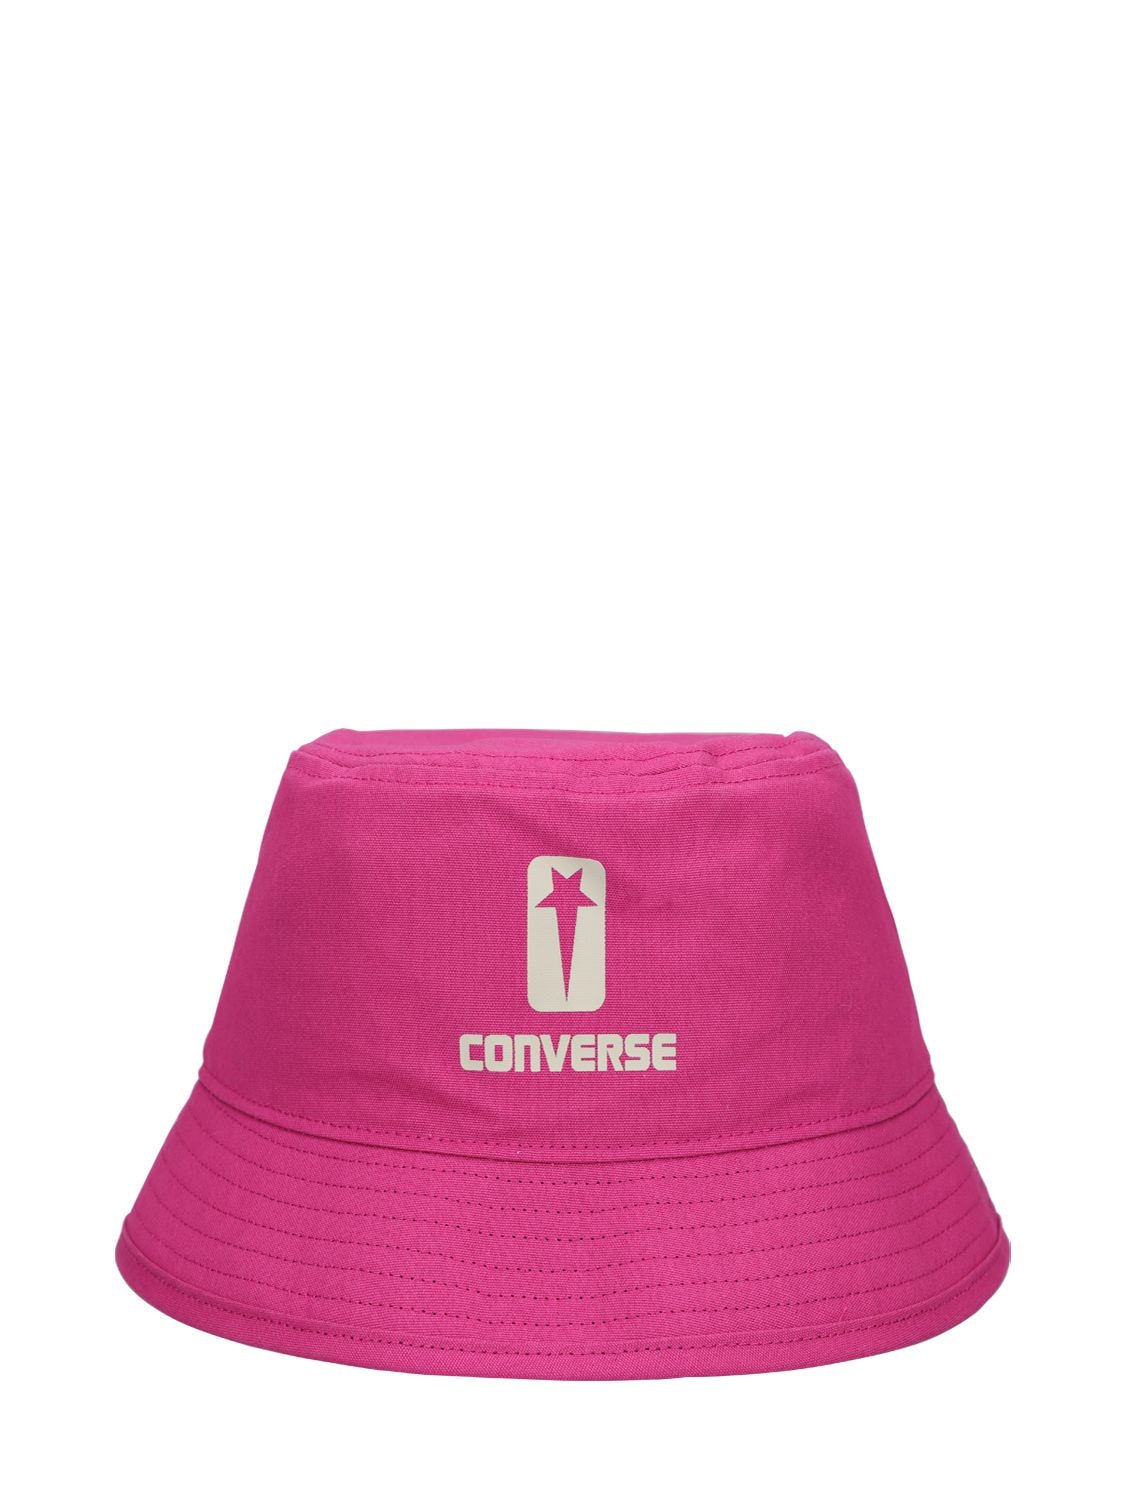 Drkshdw X Converse Converse Printed Cotton Bucket Hat In Pink